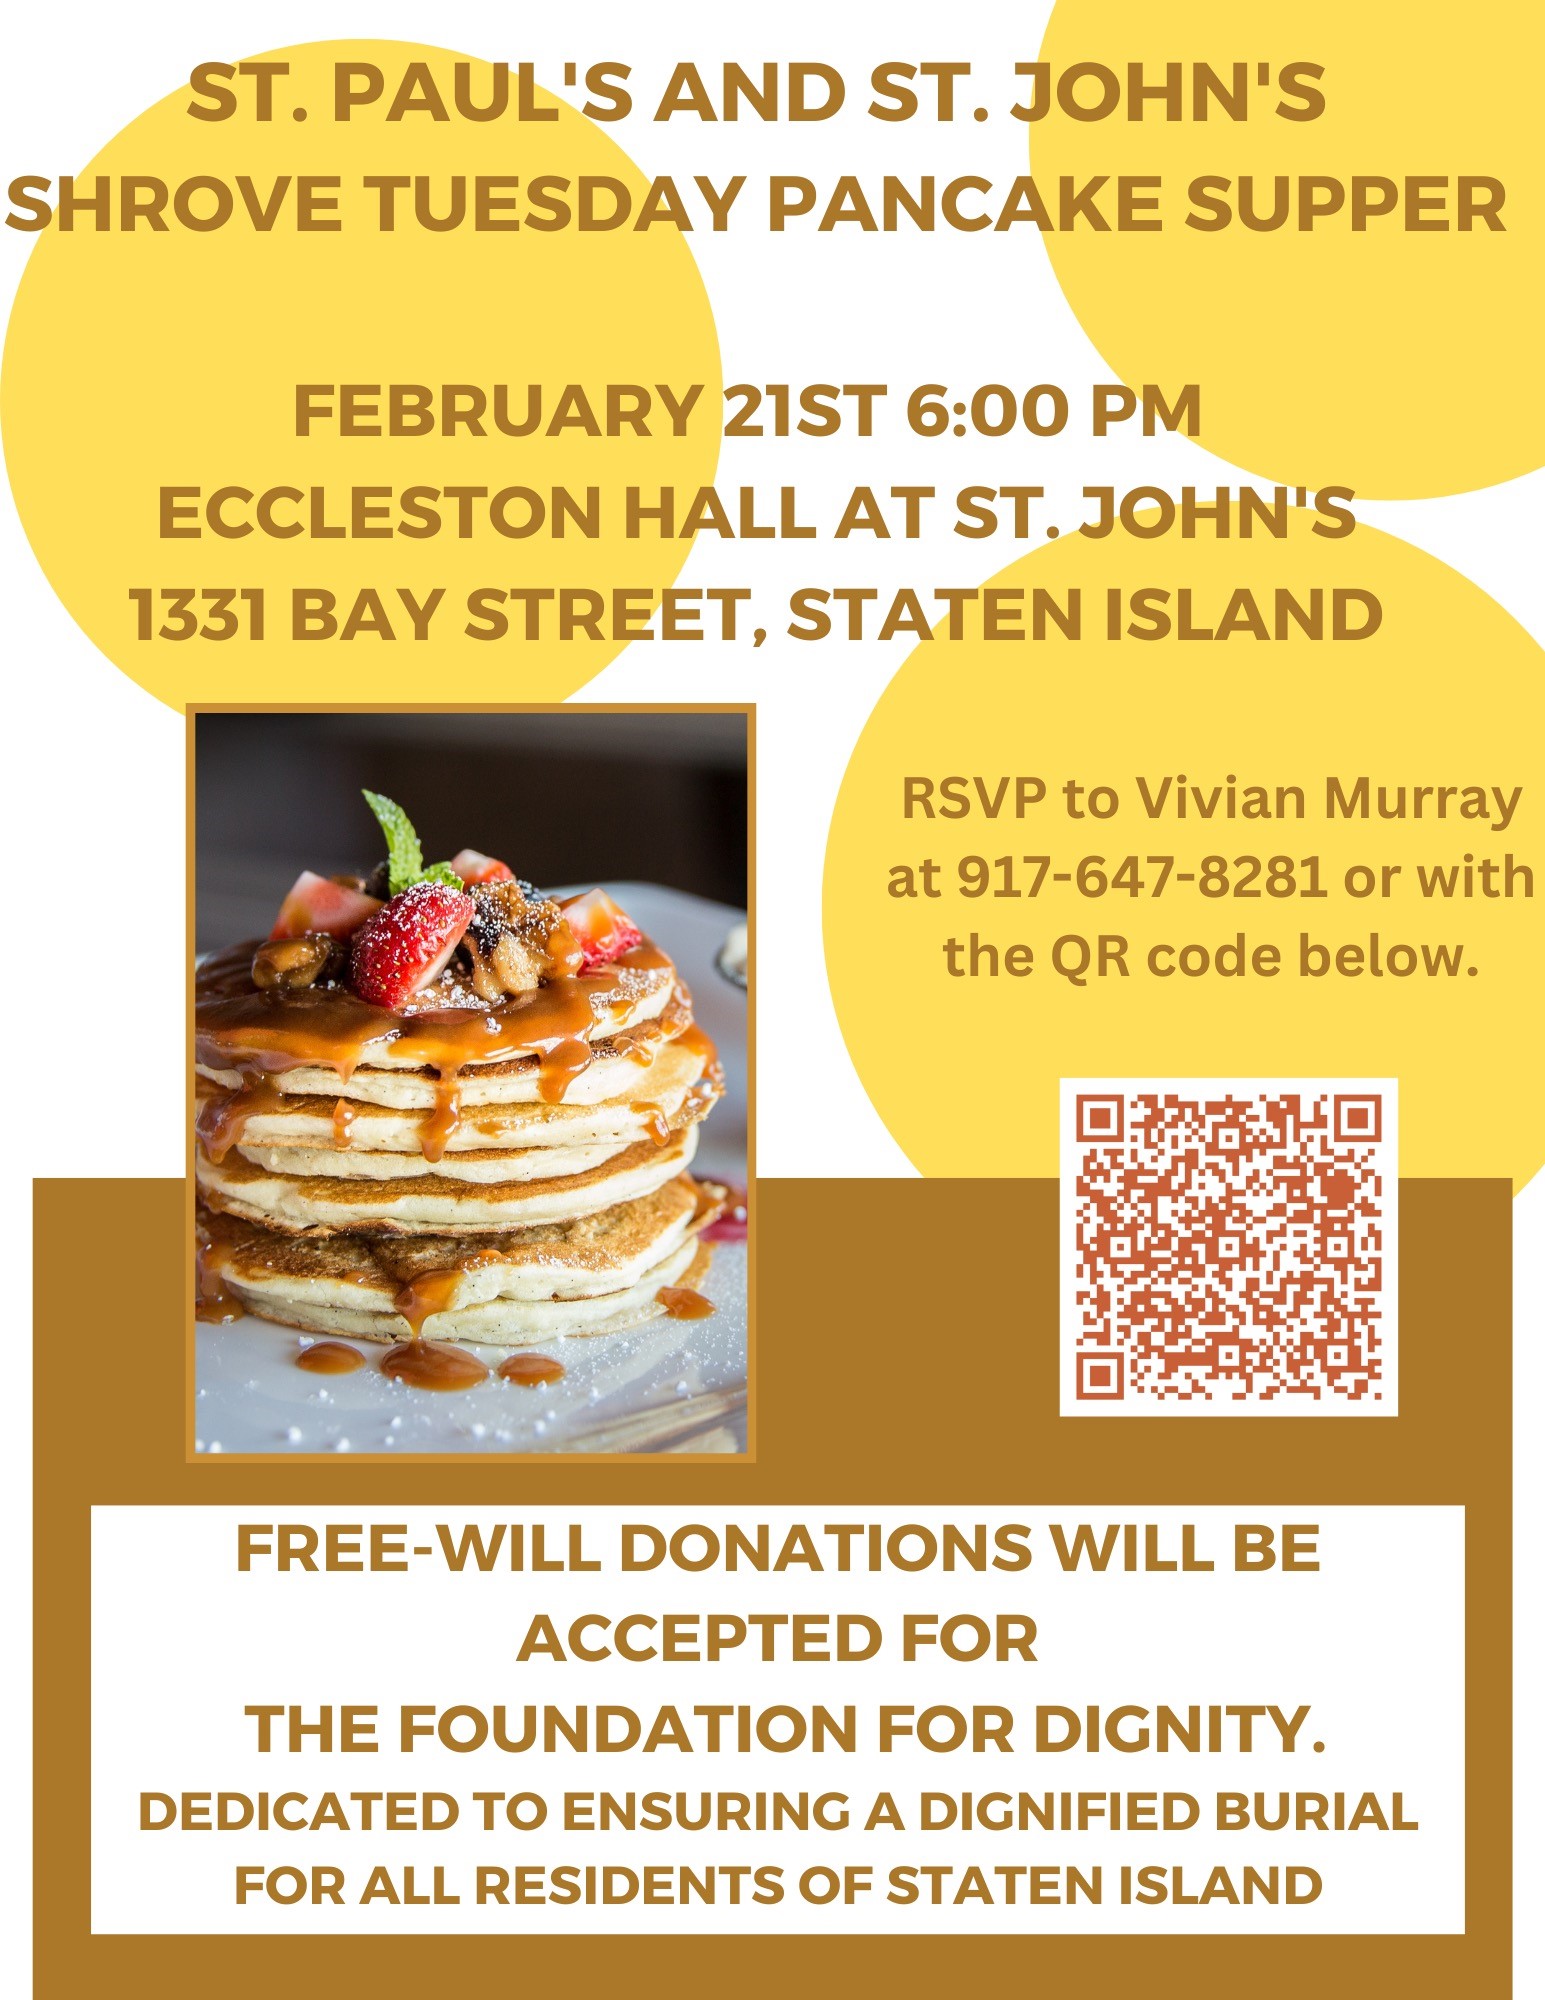 St. Paul and St. John Shrove Tuesday Pancake Supper, February 21, 6PM, RSVP to Vivian Murray at 917 647 8281